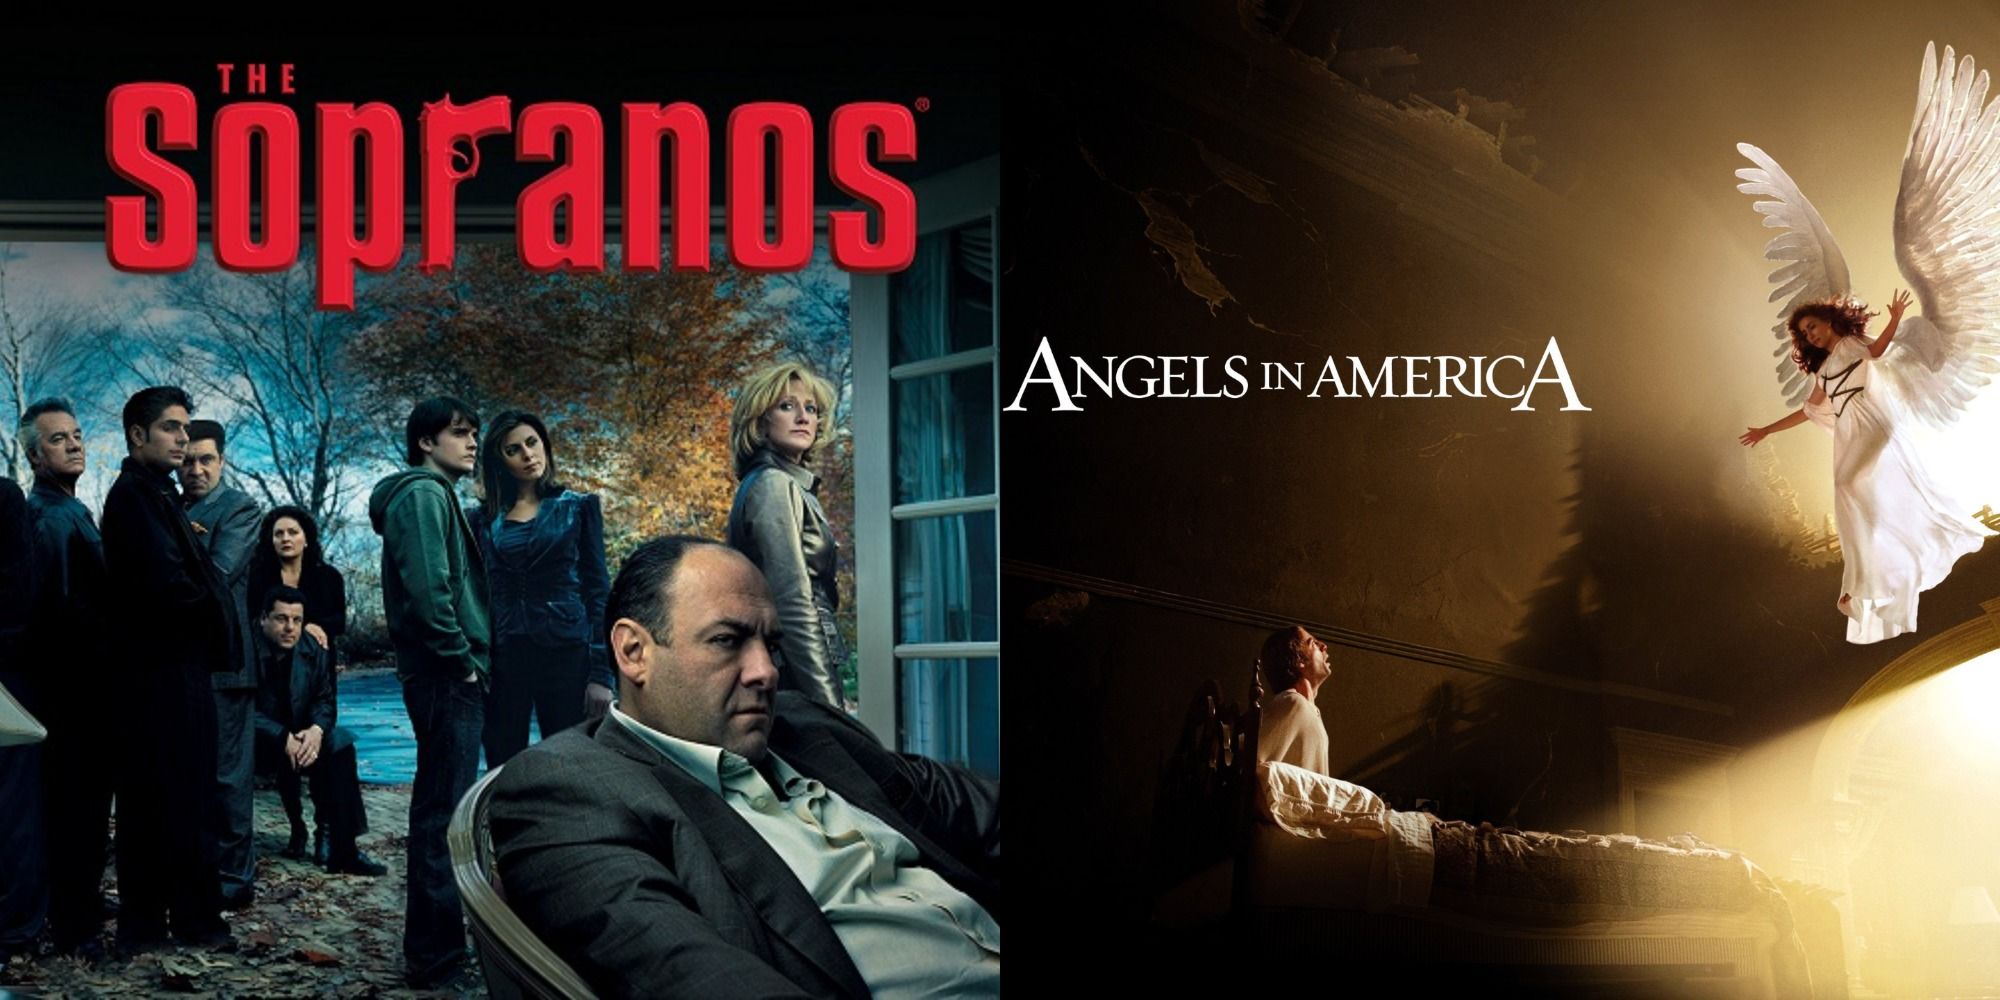 Split image shwoing posters for The Sopranos and Angels in America